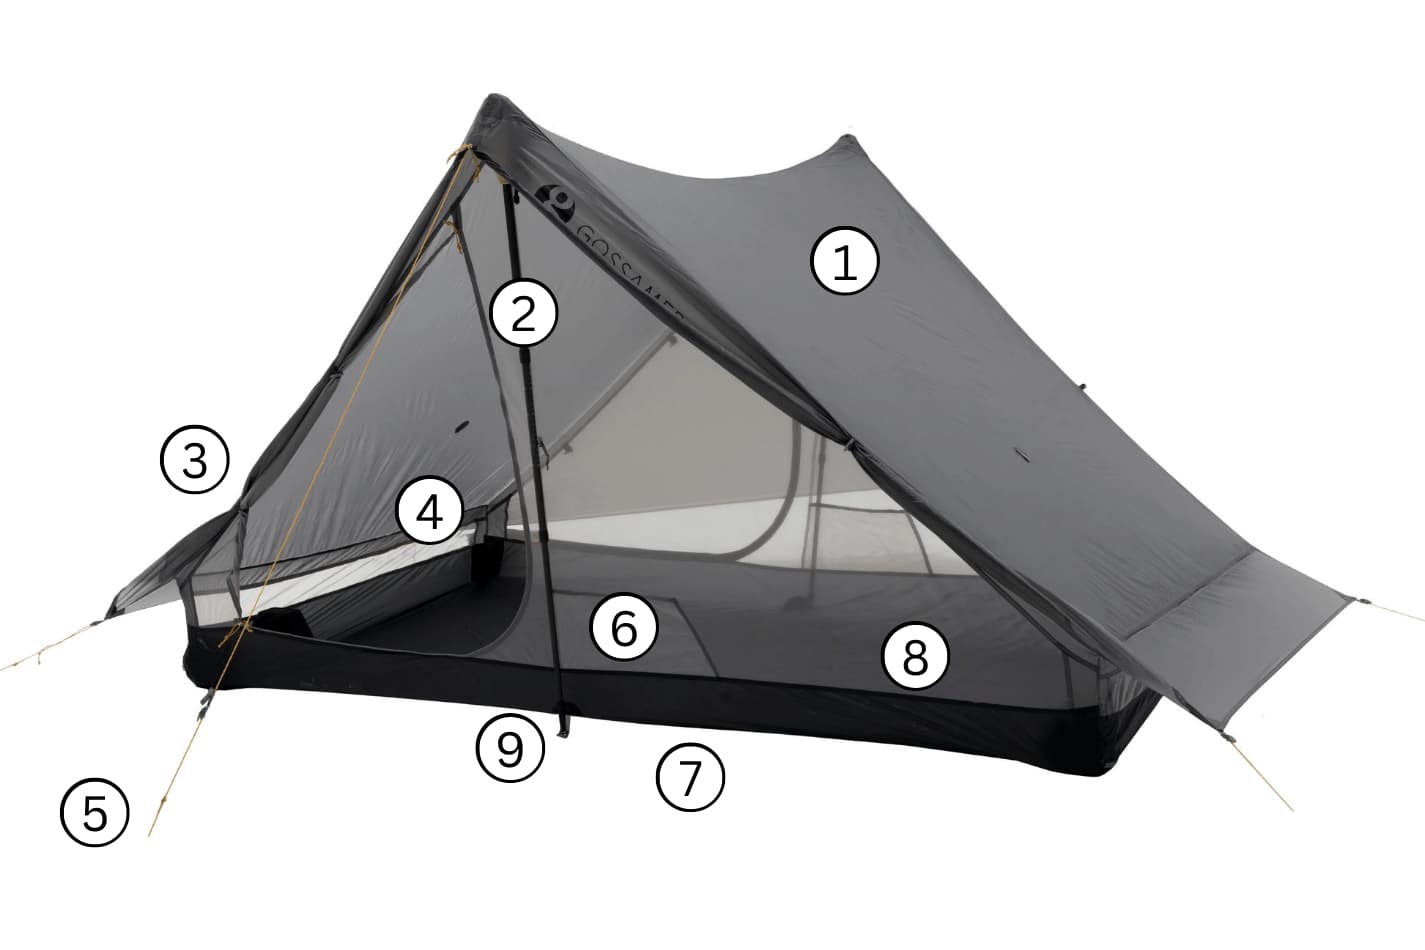 Gossamer Gear The Two single wall tent with points of interest noted for the below post content.